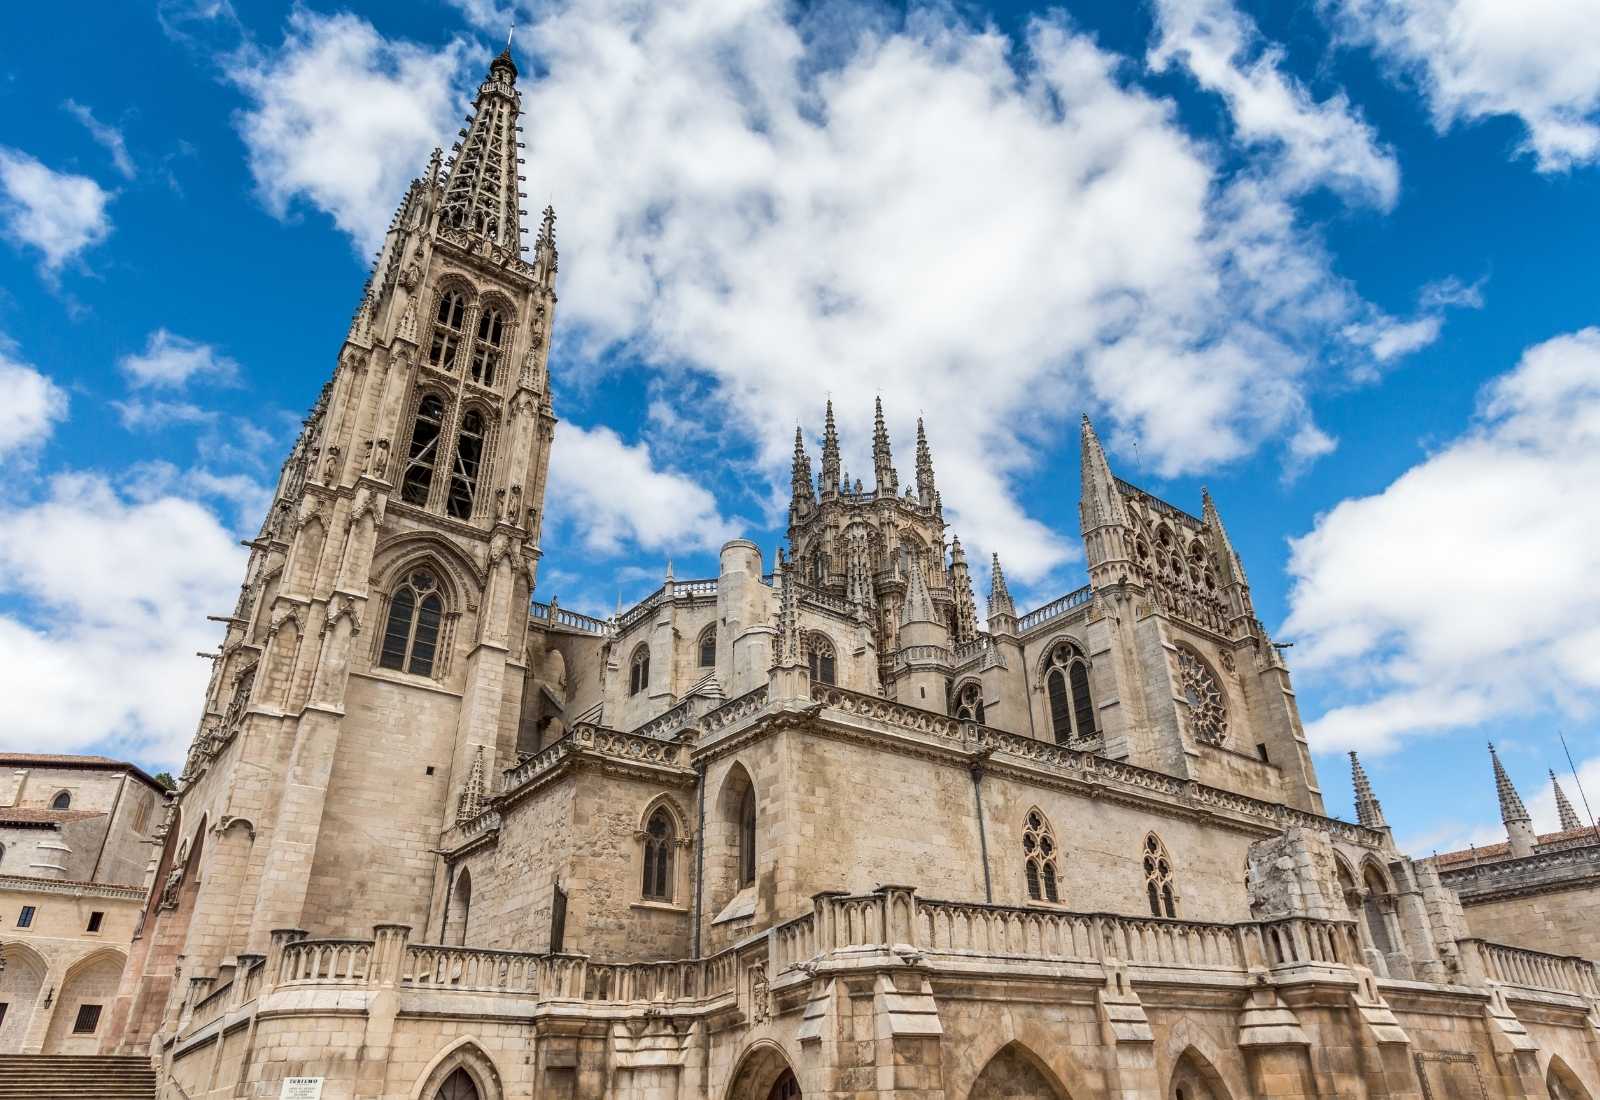 Cathedral of Burgos, one of the most important in the Camino de Santiago.